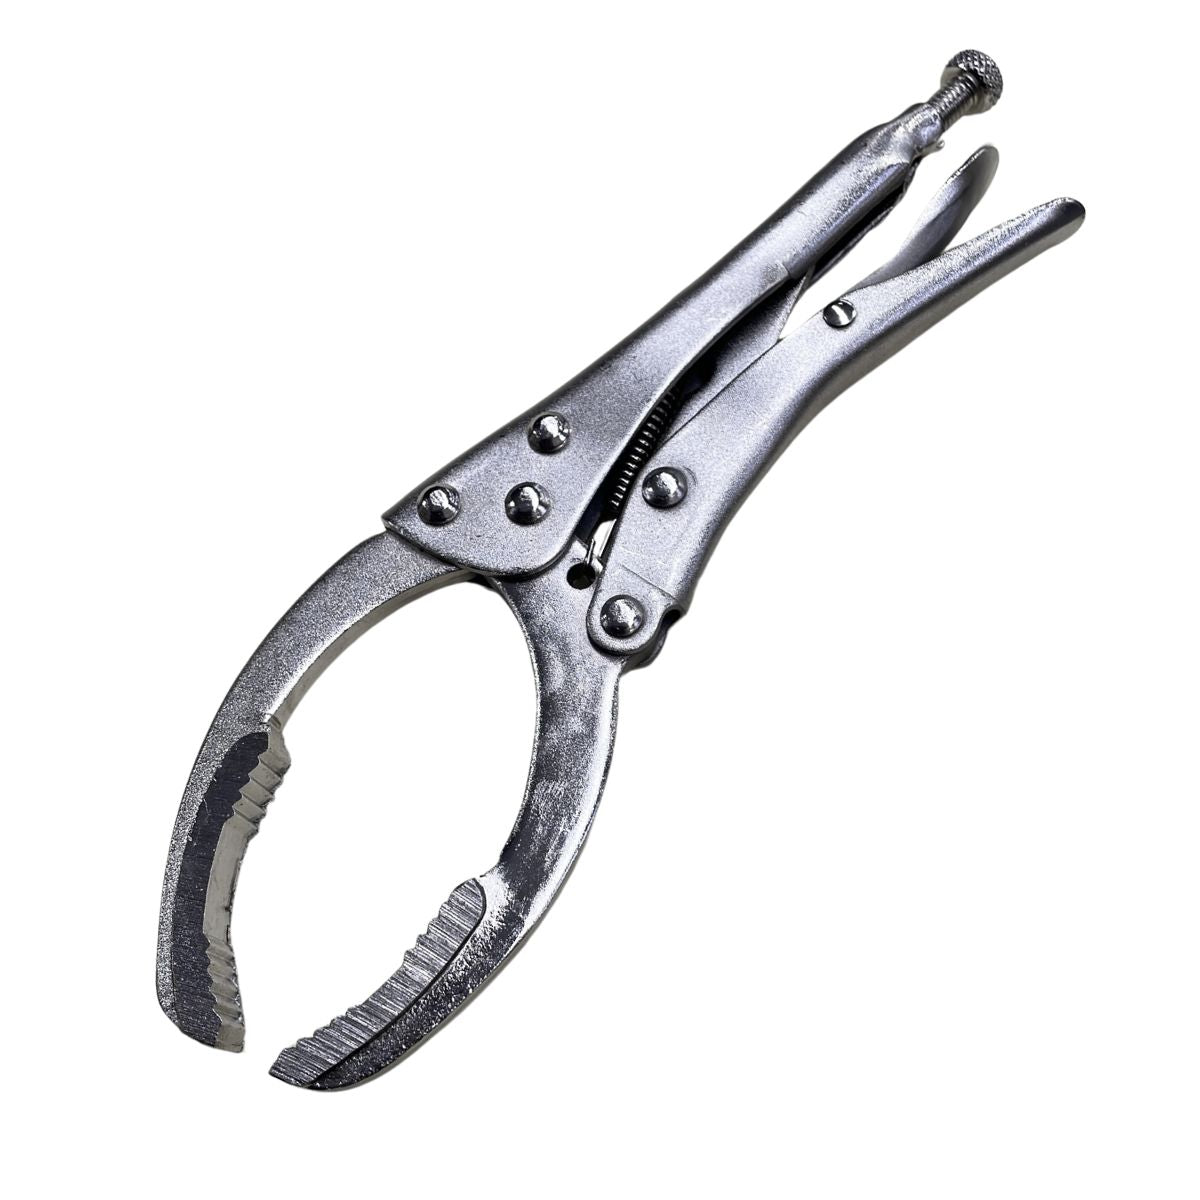 Oil Filter Wrench Pliers - 9.5" - South East Clearance Centre